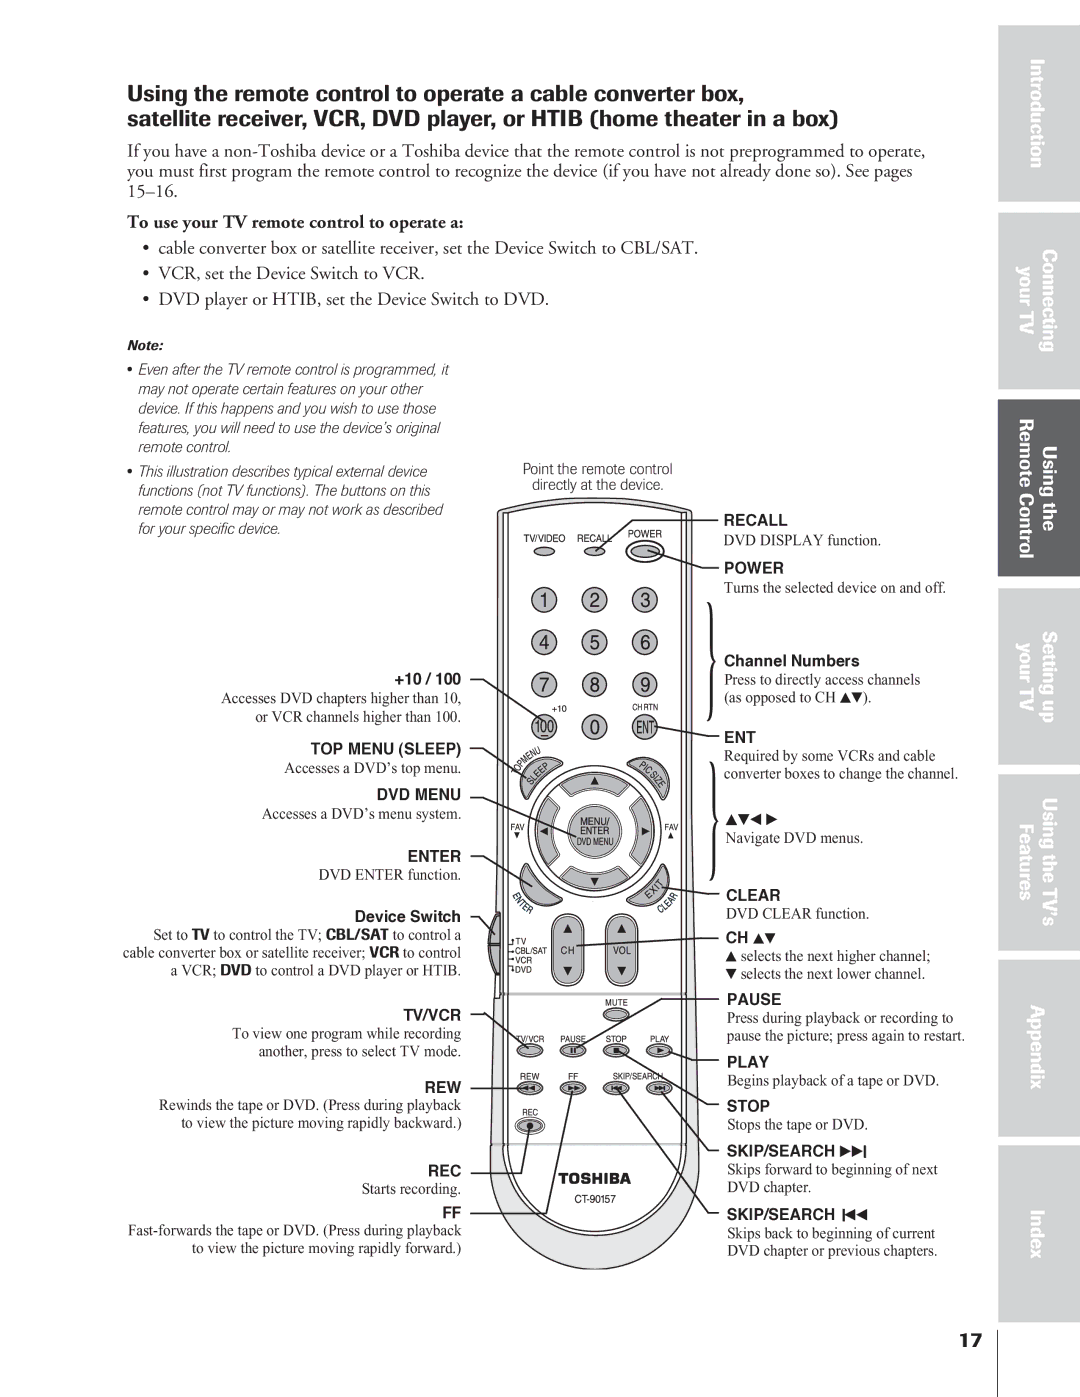 Toshiba 32AF14 owner manual To use your TV remote control to operate a, Point the remote control Directly at the device 